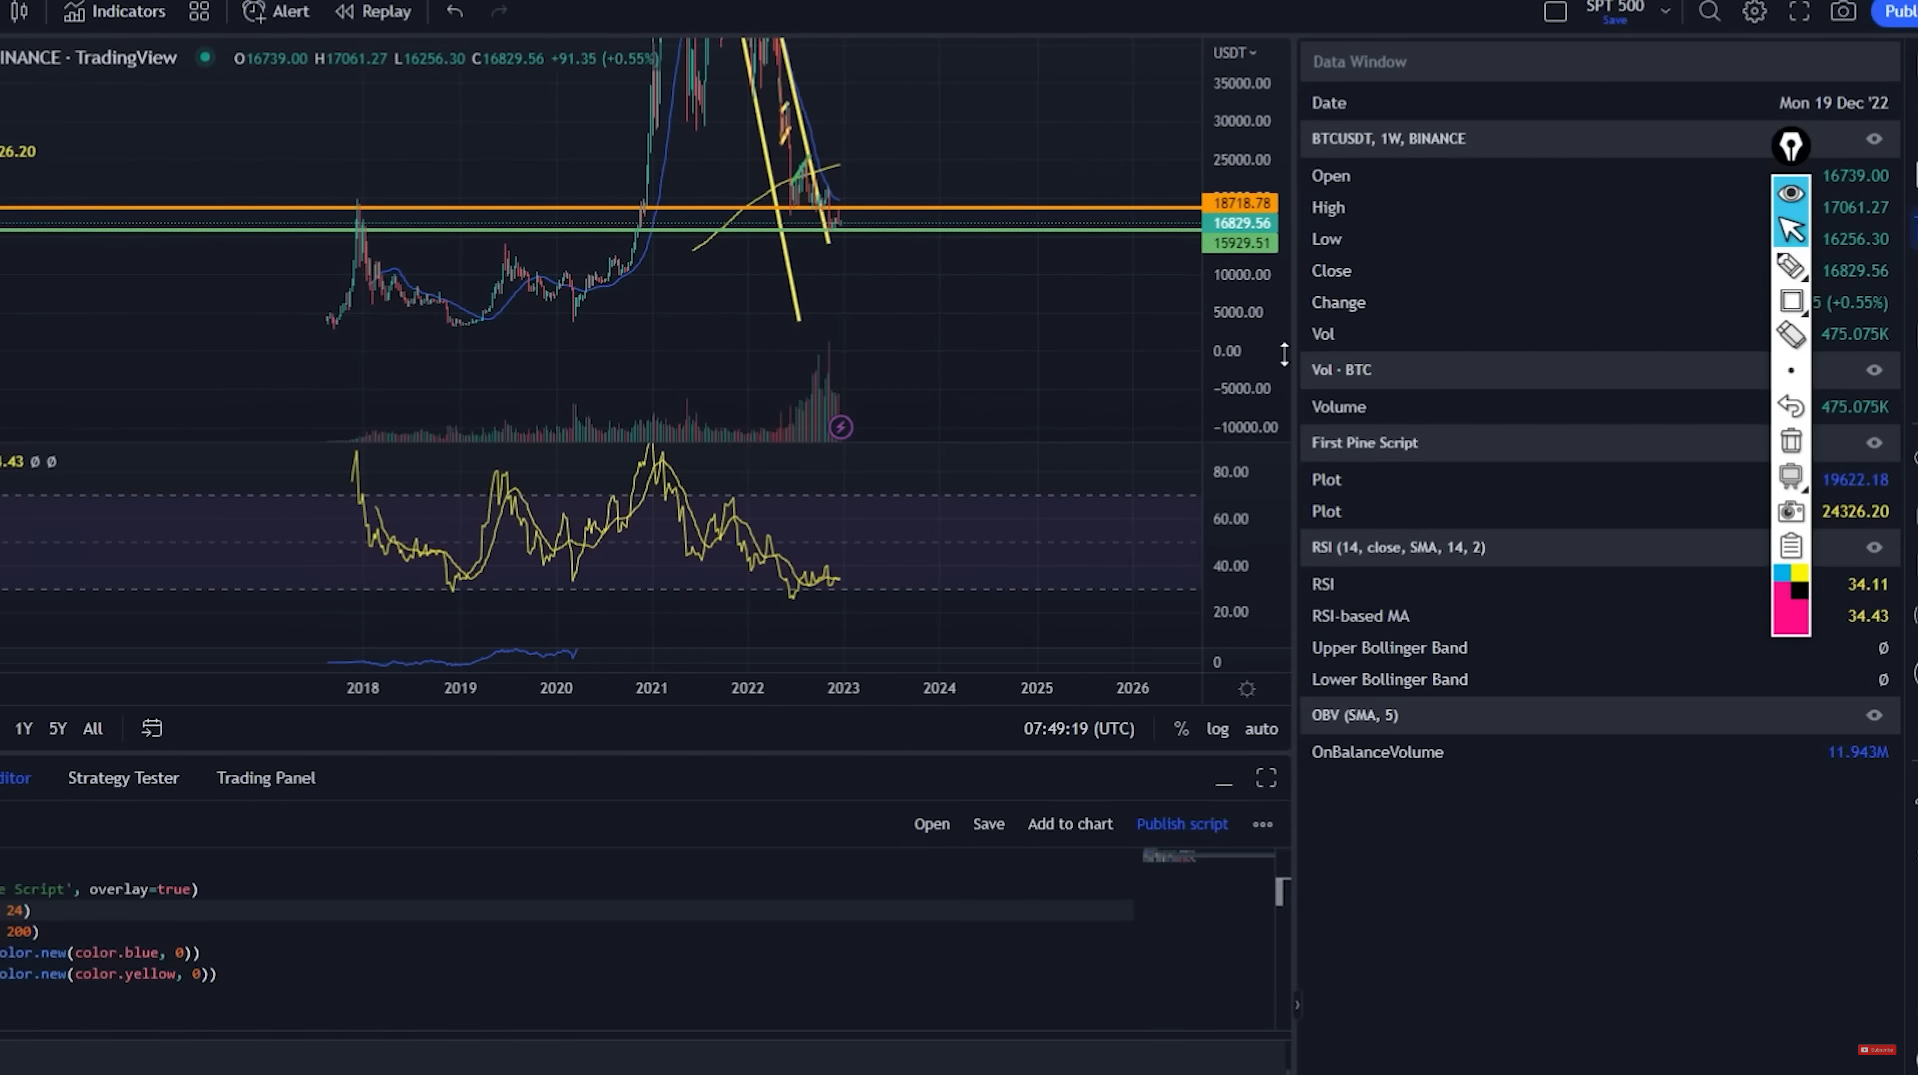 chat-gpt-how-to-identify-the-bitcoin-bottom-using-market-analysis